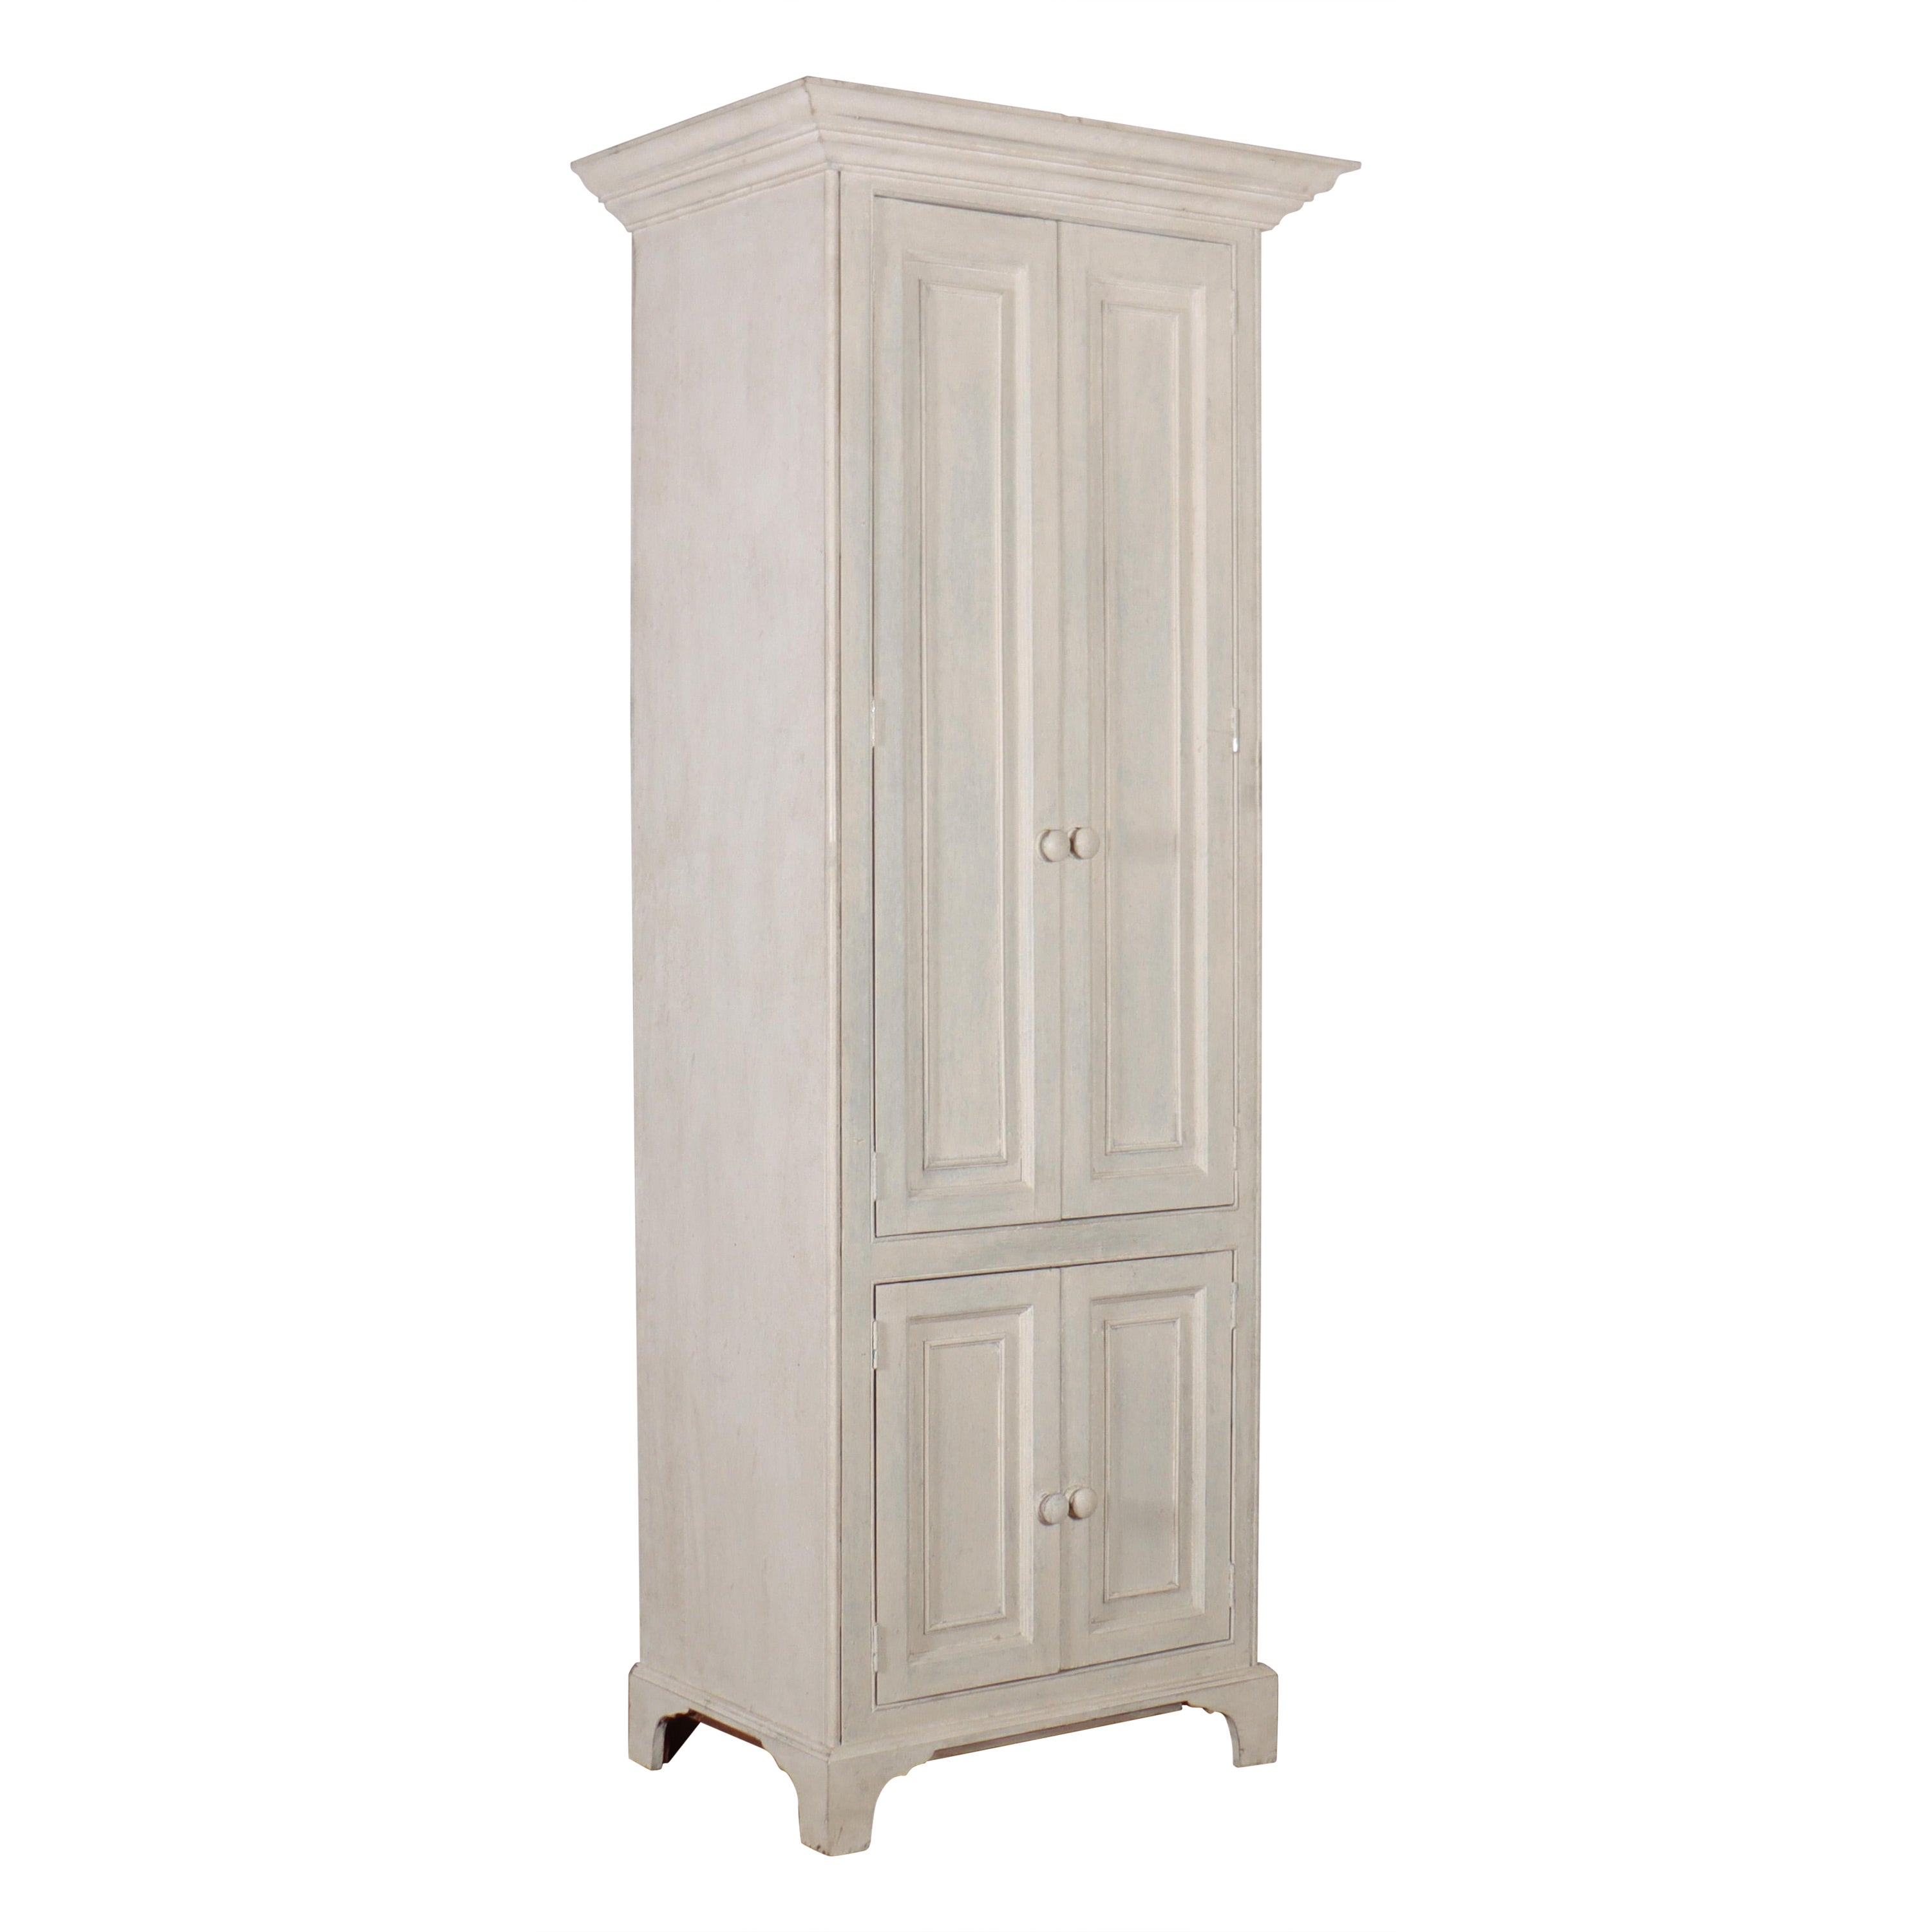 Painted Pine Linen Cupboard For Sale